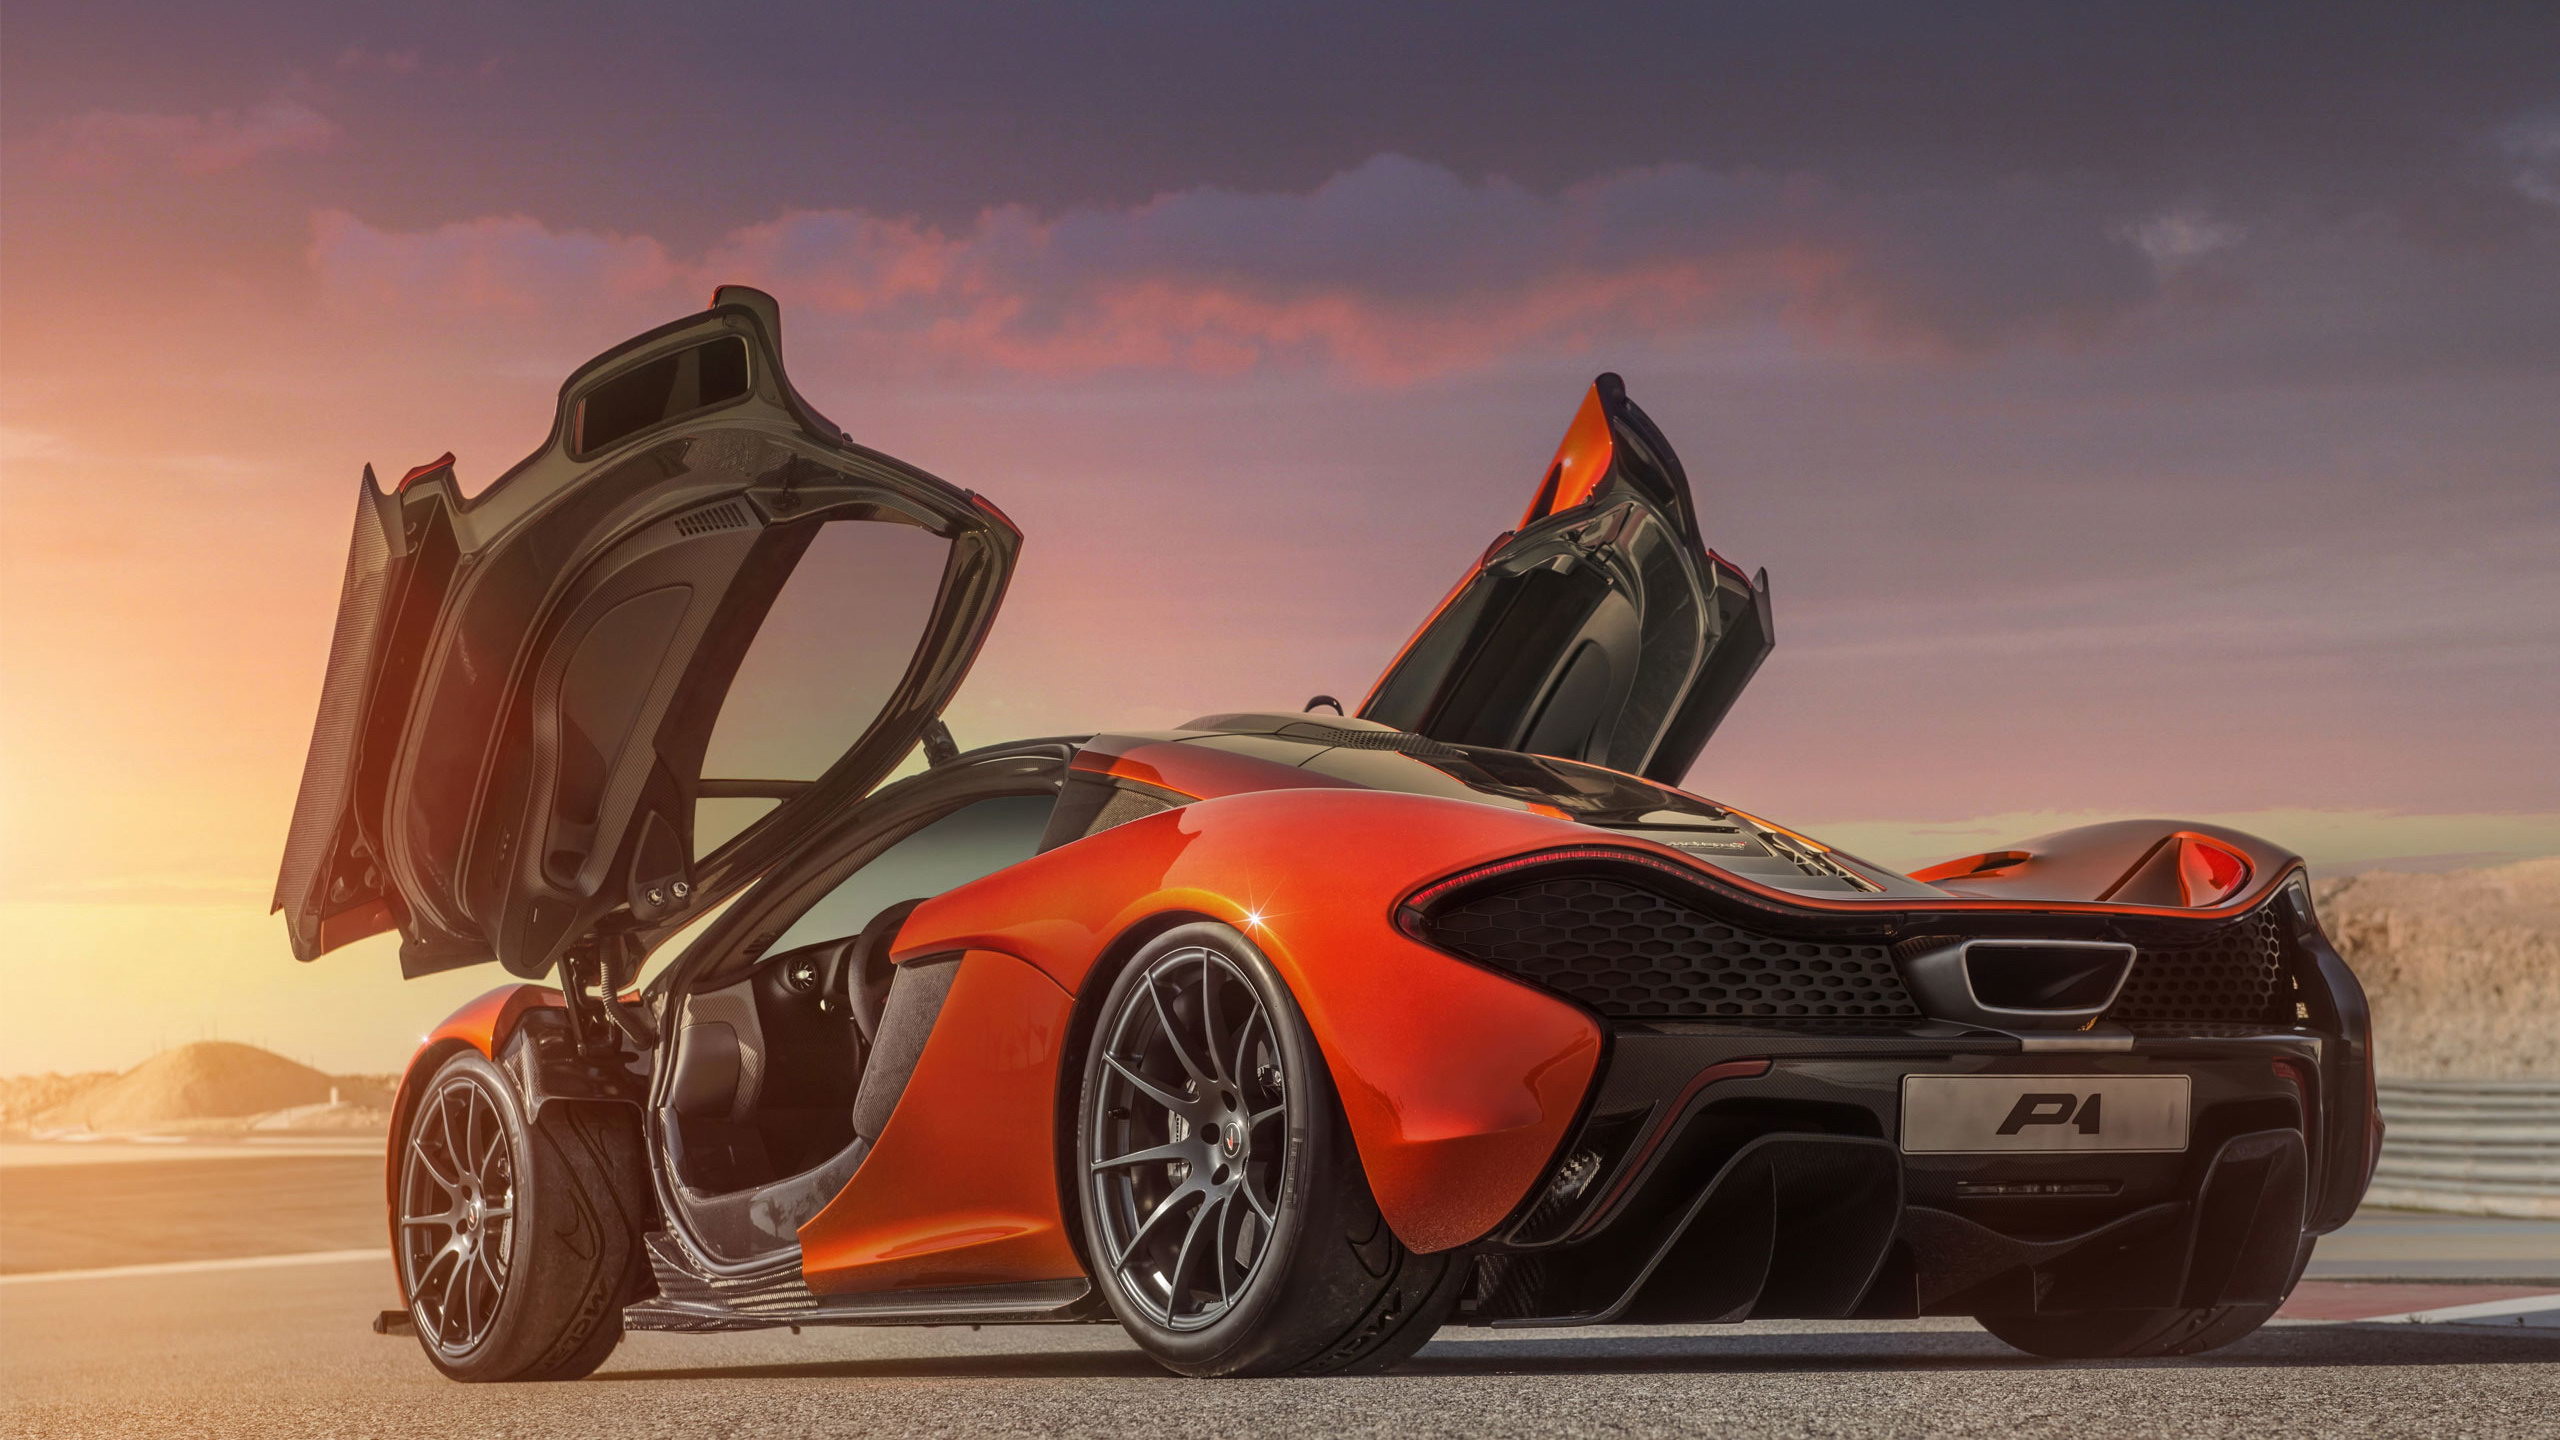 2560x1440 New-Year-Car-Wallpapers-2014-15